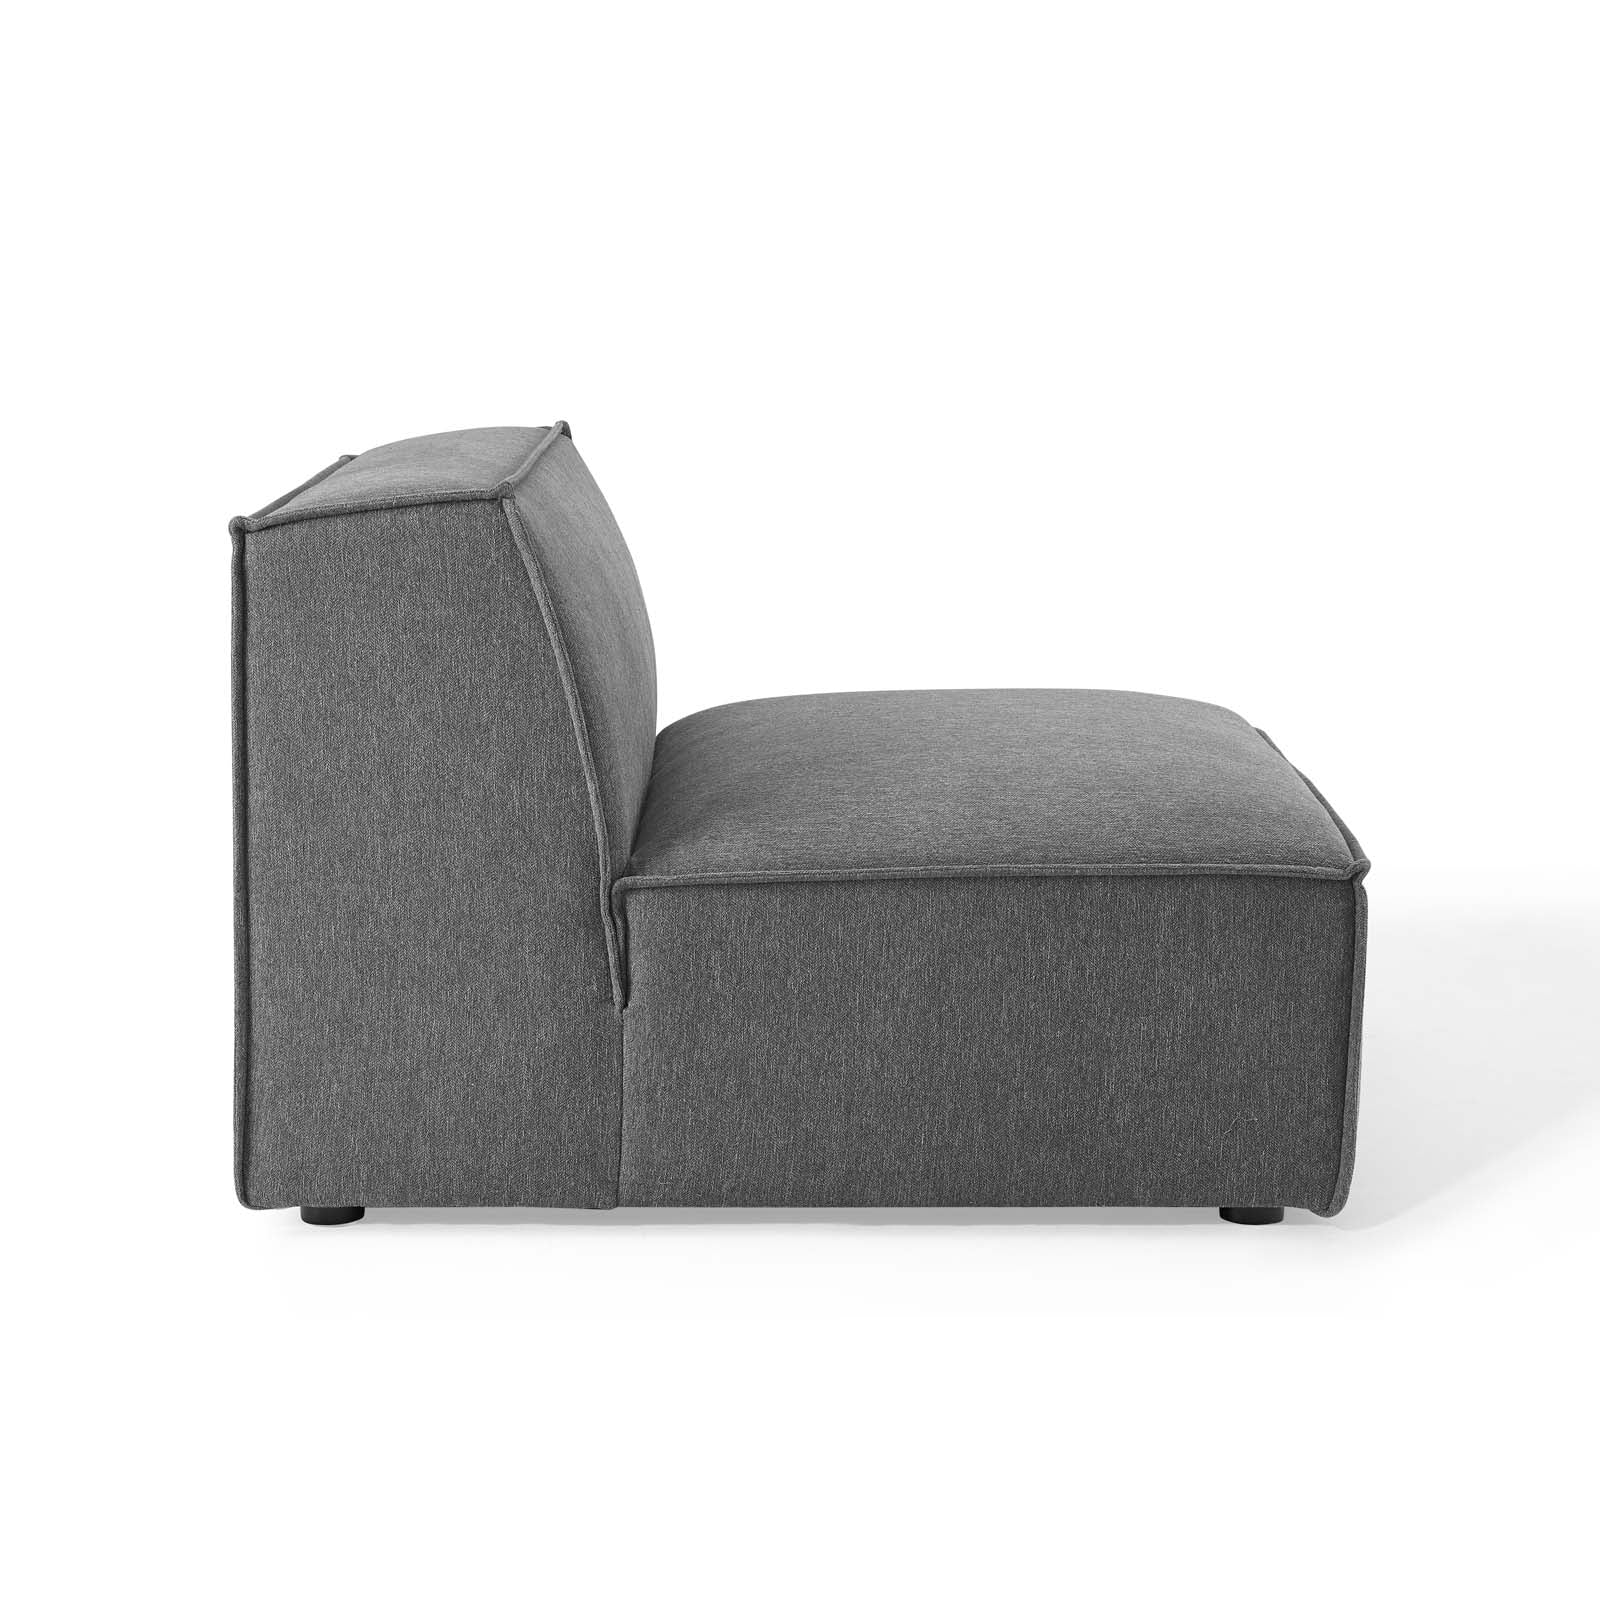 Breeze 5 Piece Extended Sectional - Charcoal